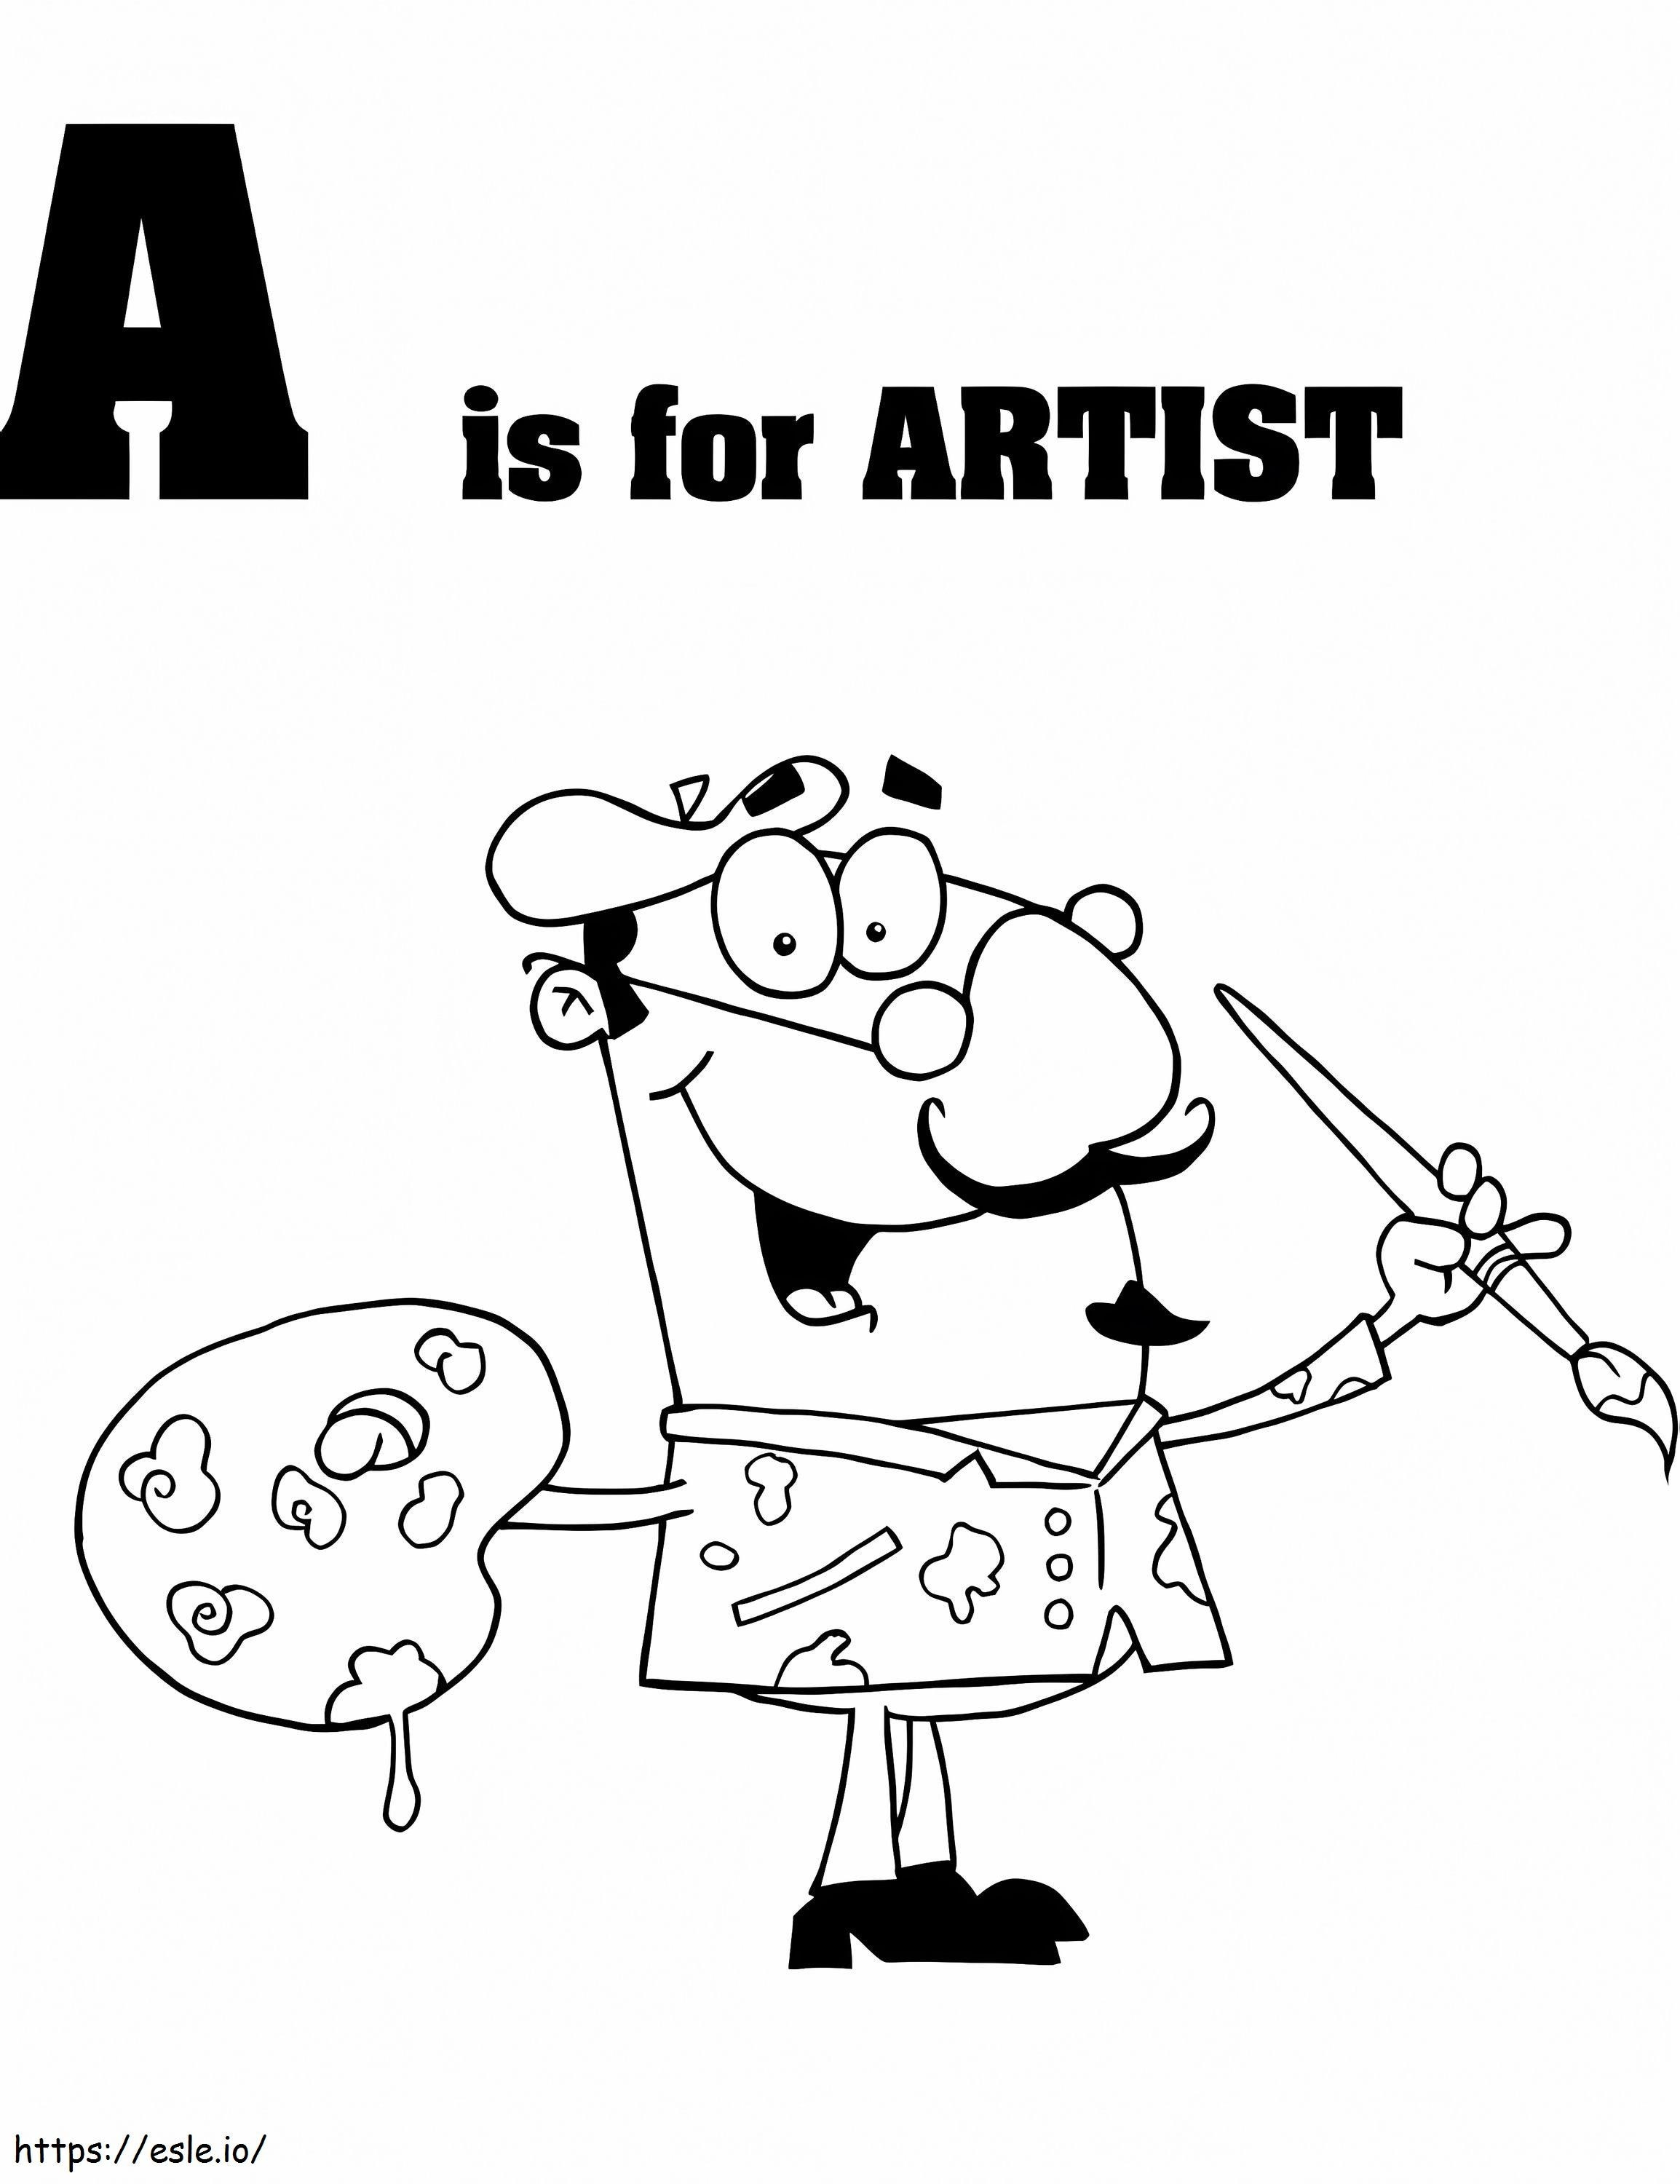 Artist Letter A coloring page